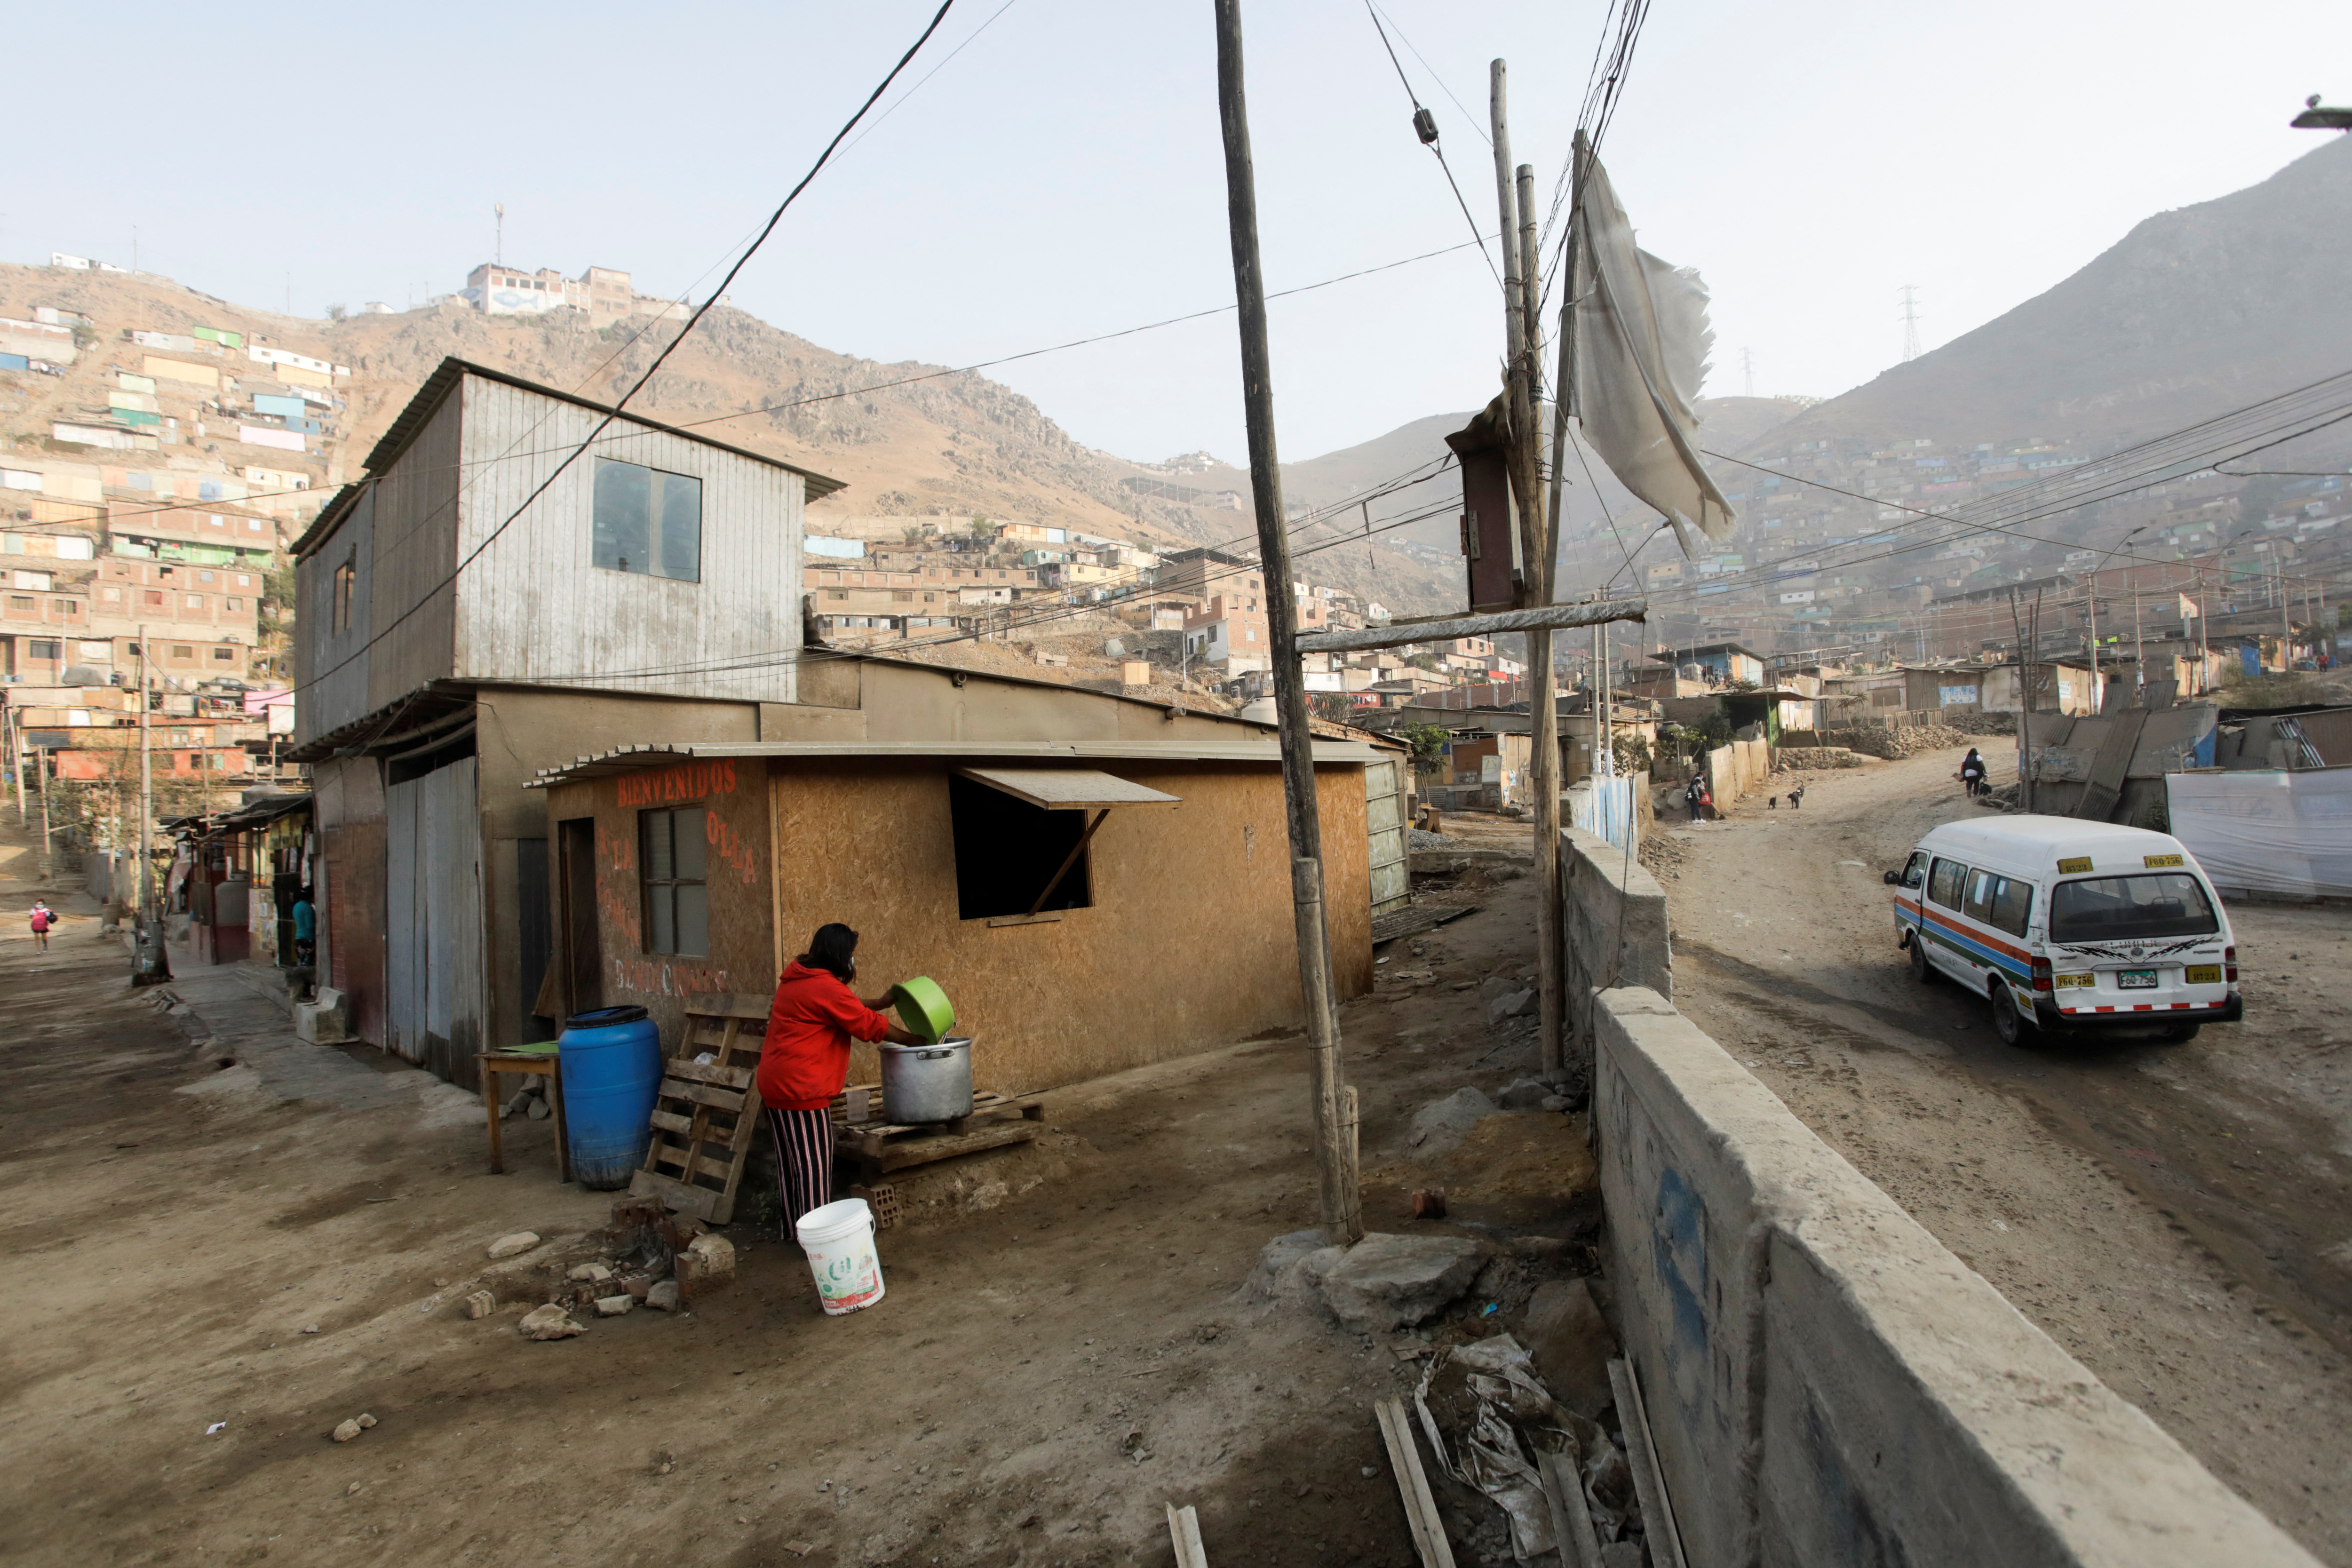 Soup kitchens on the outskirts of Lima struggle with inflation